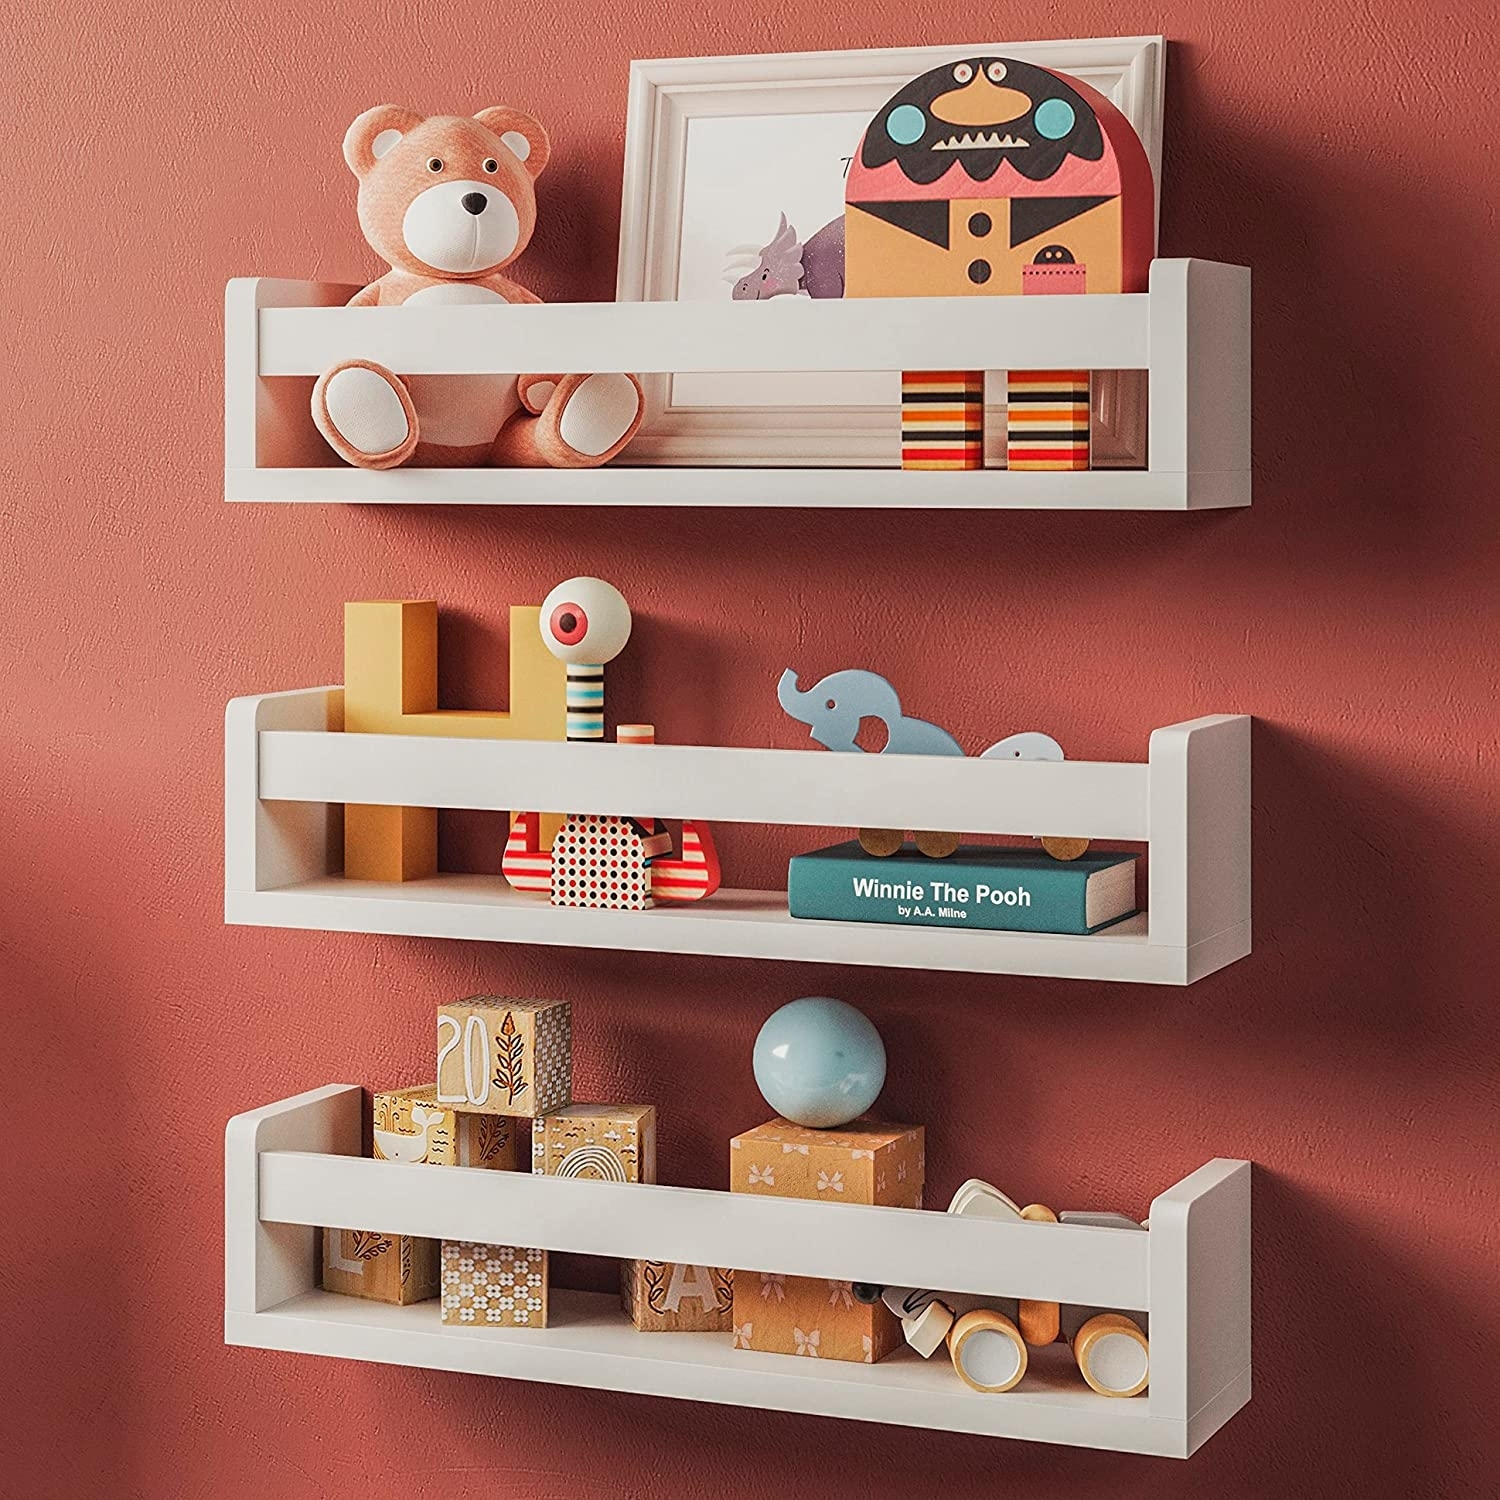 three wooden shelves holding kid toys and books